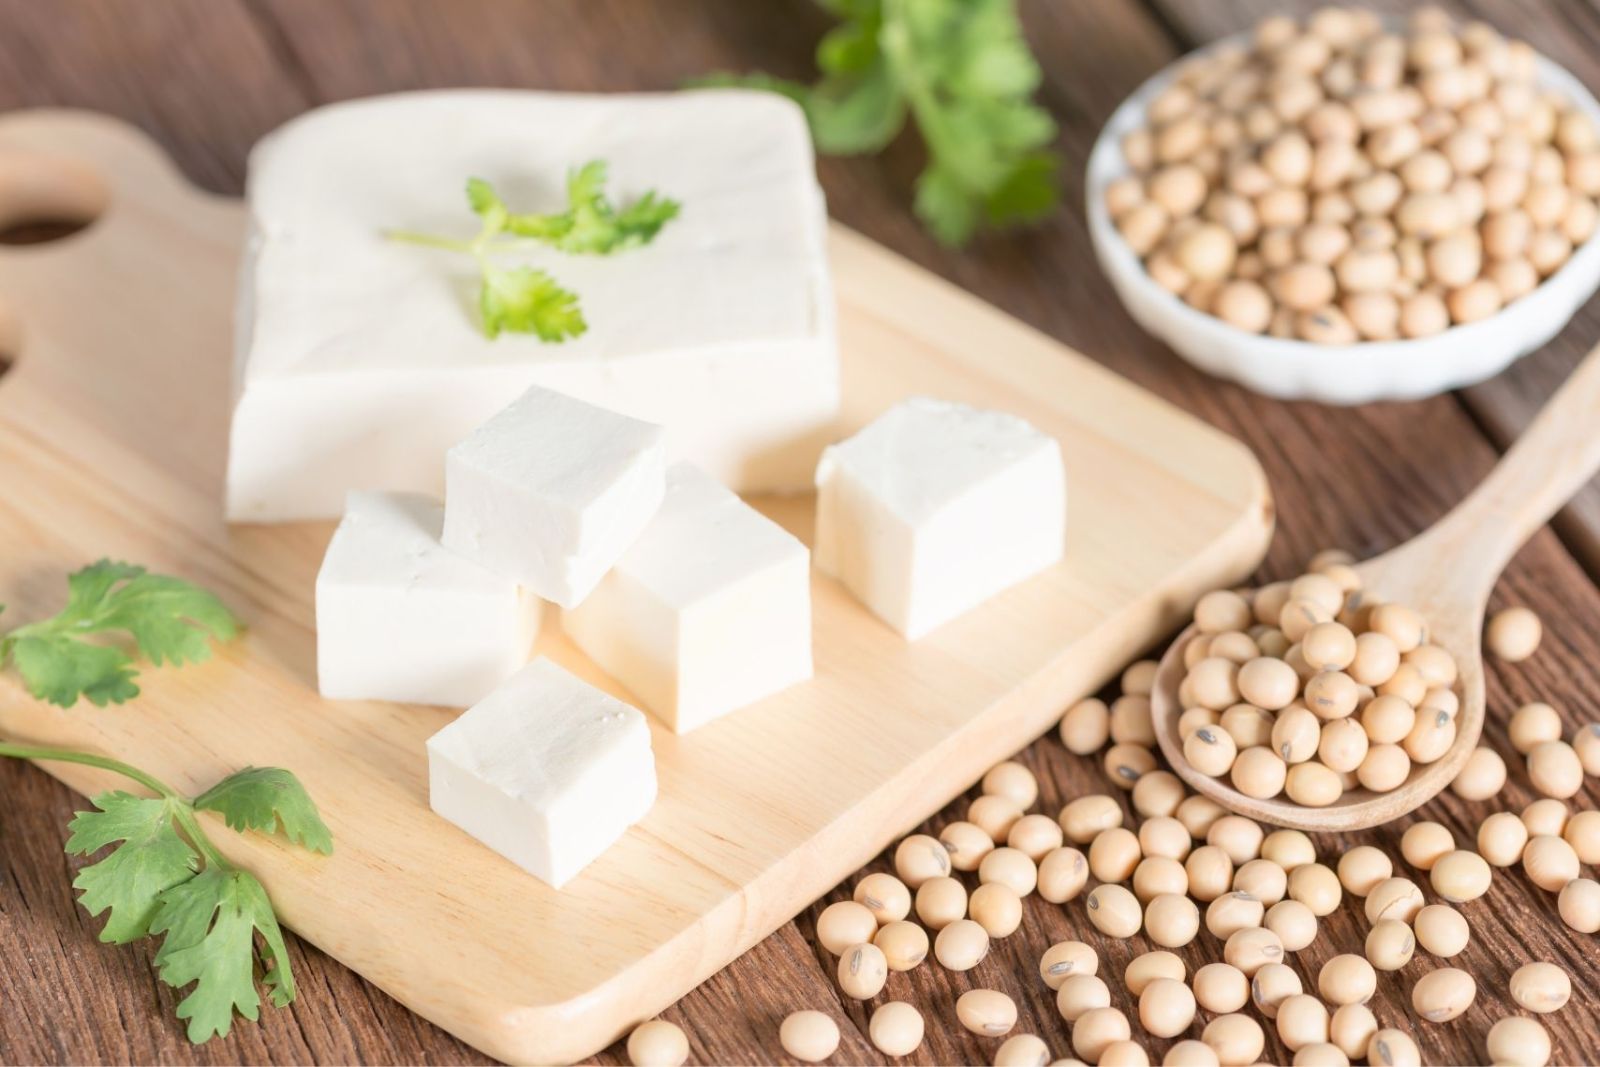 Tofu is made from soybeans with a healthy source of nutrition